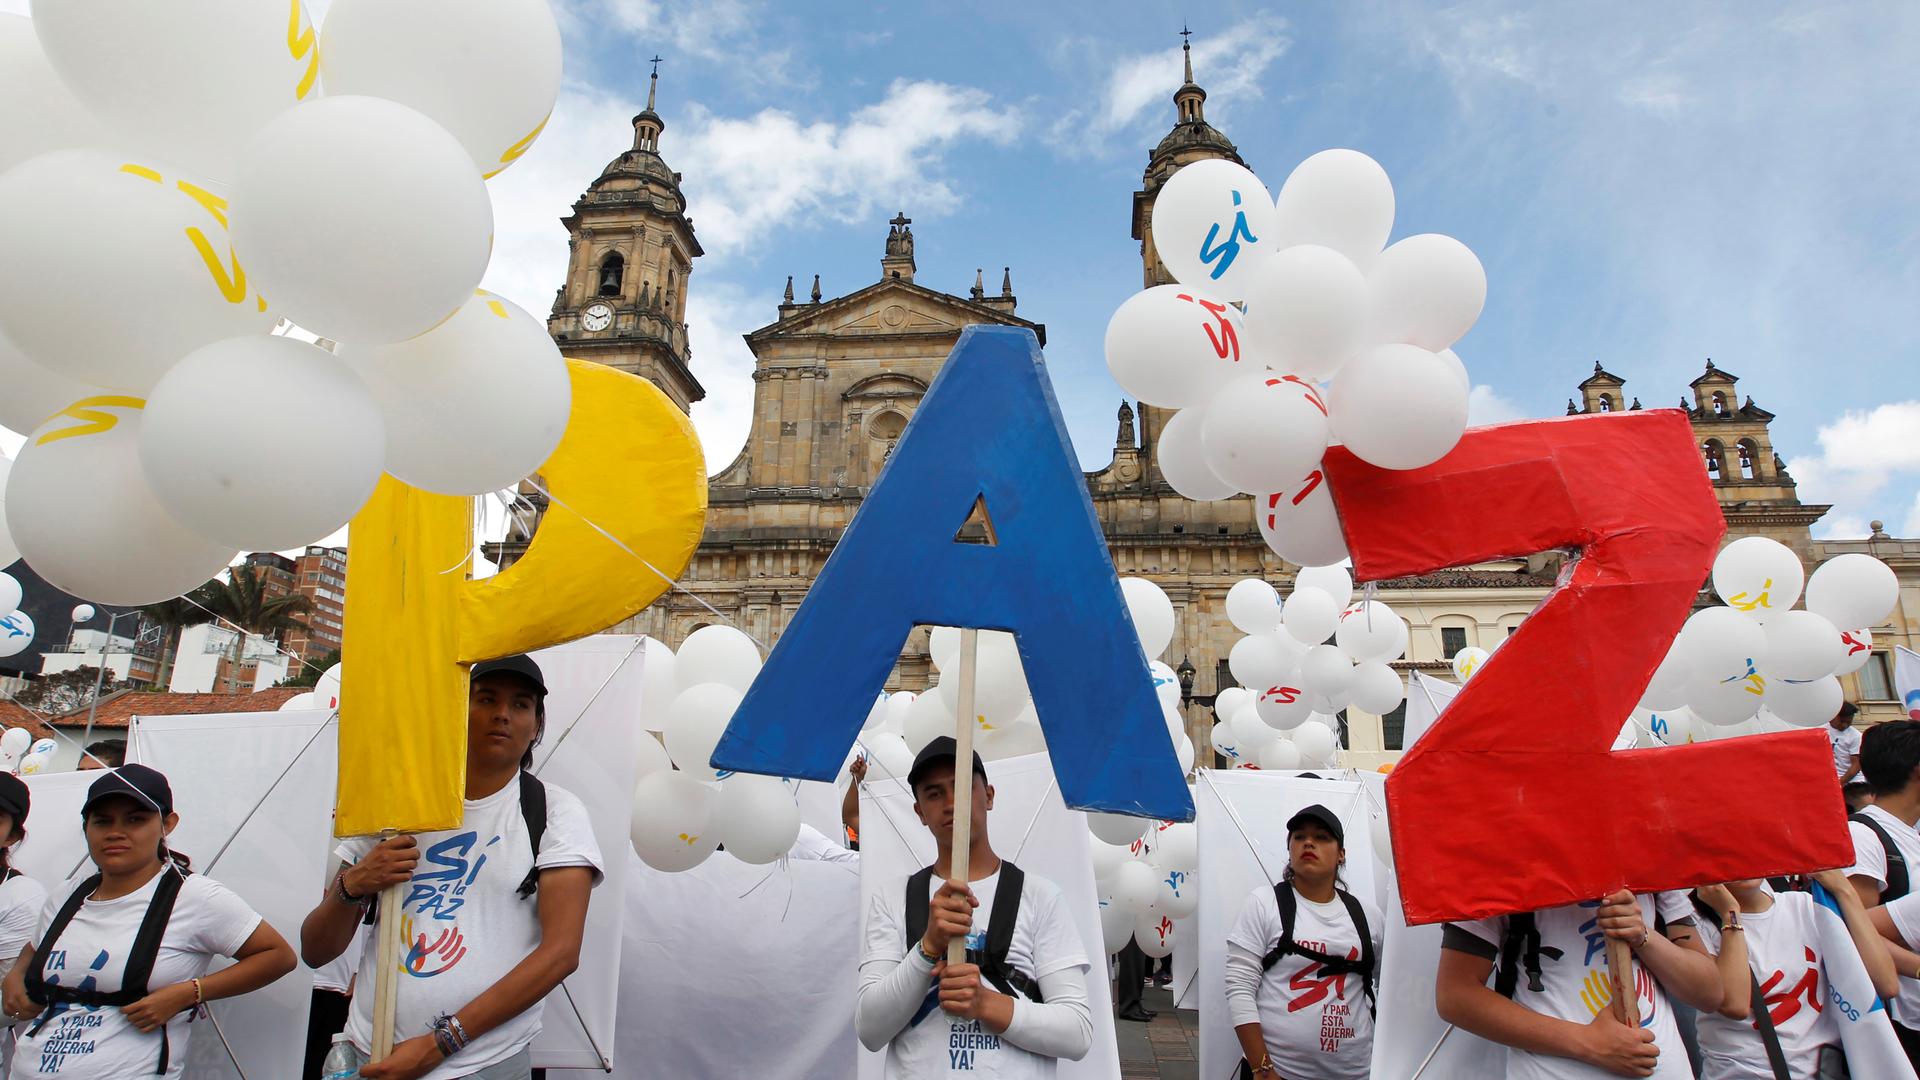 Colombians gather in Bogota’s Bolivar Square, to mark the signing of a historic peace deal with the FARC rebels.